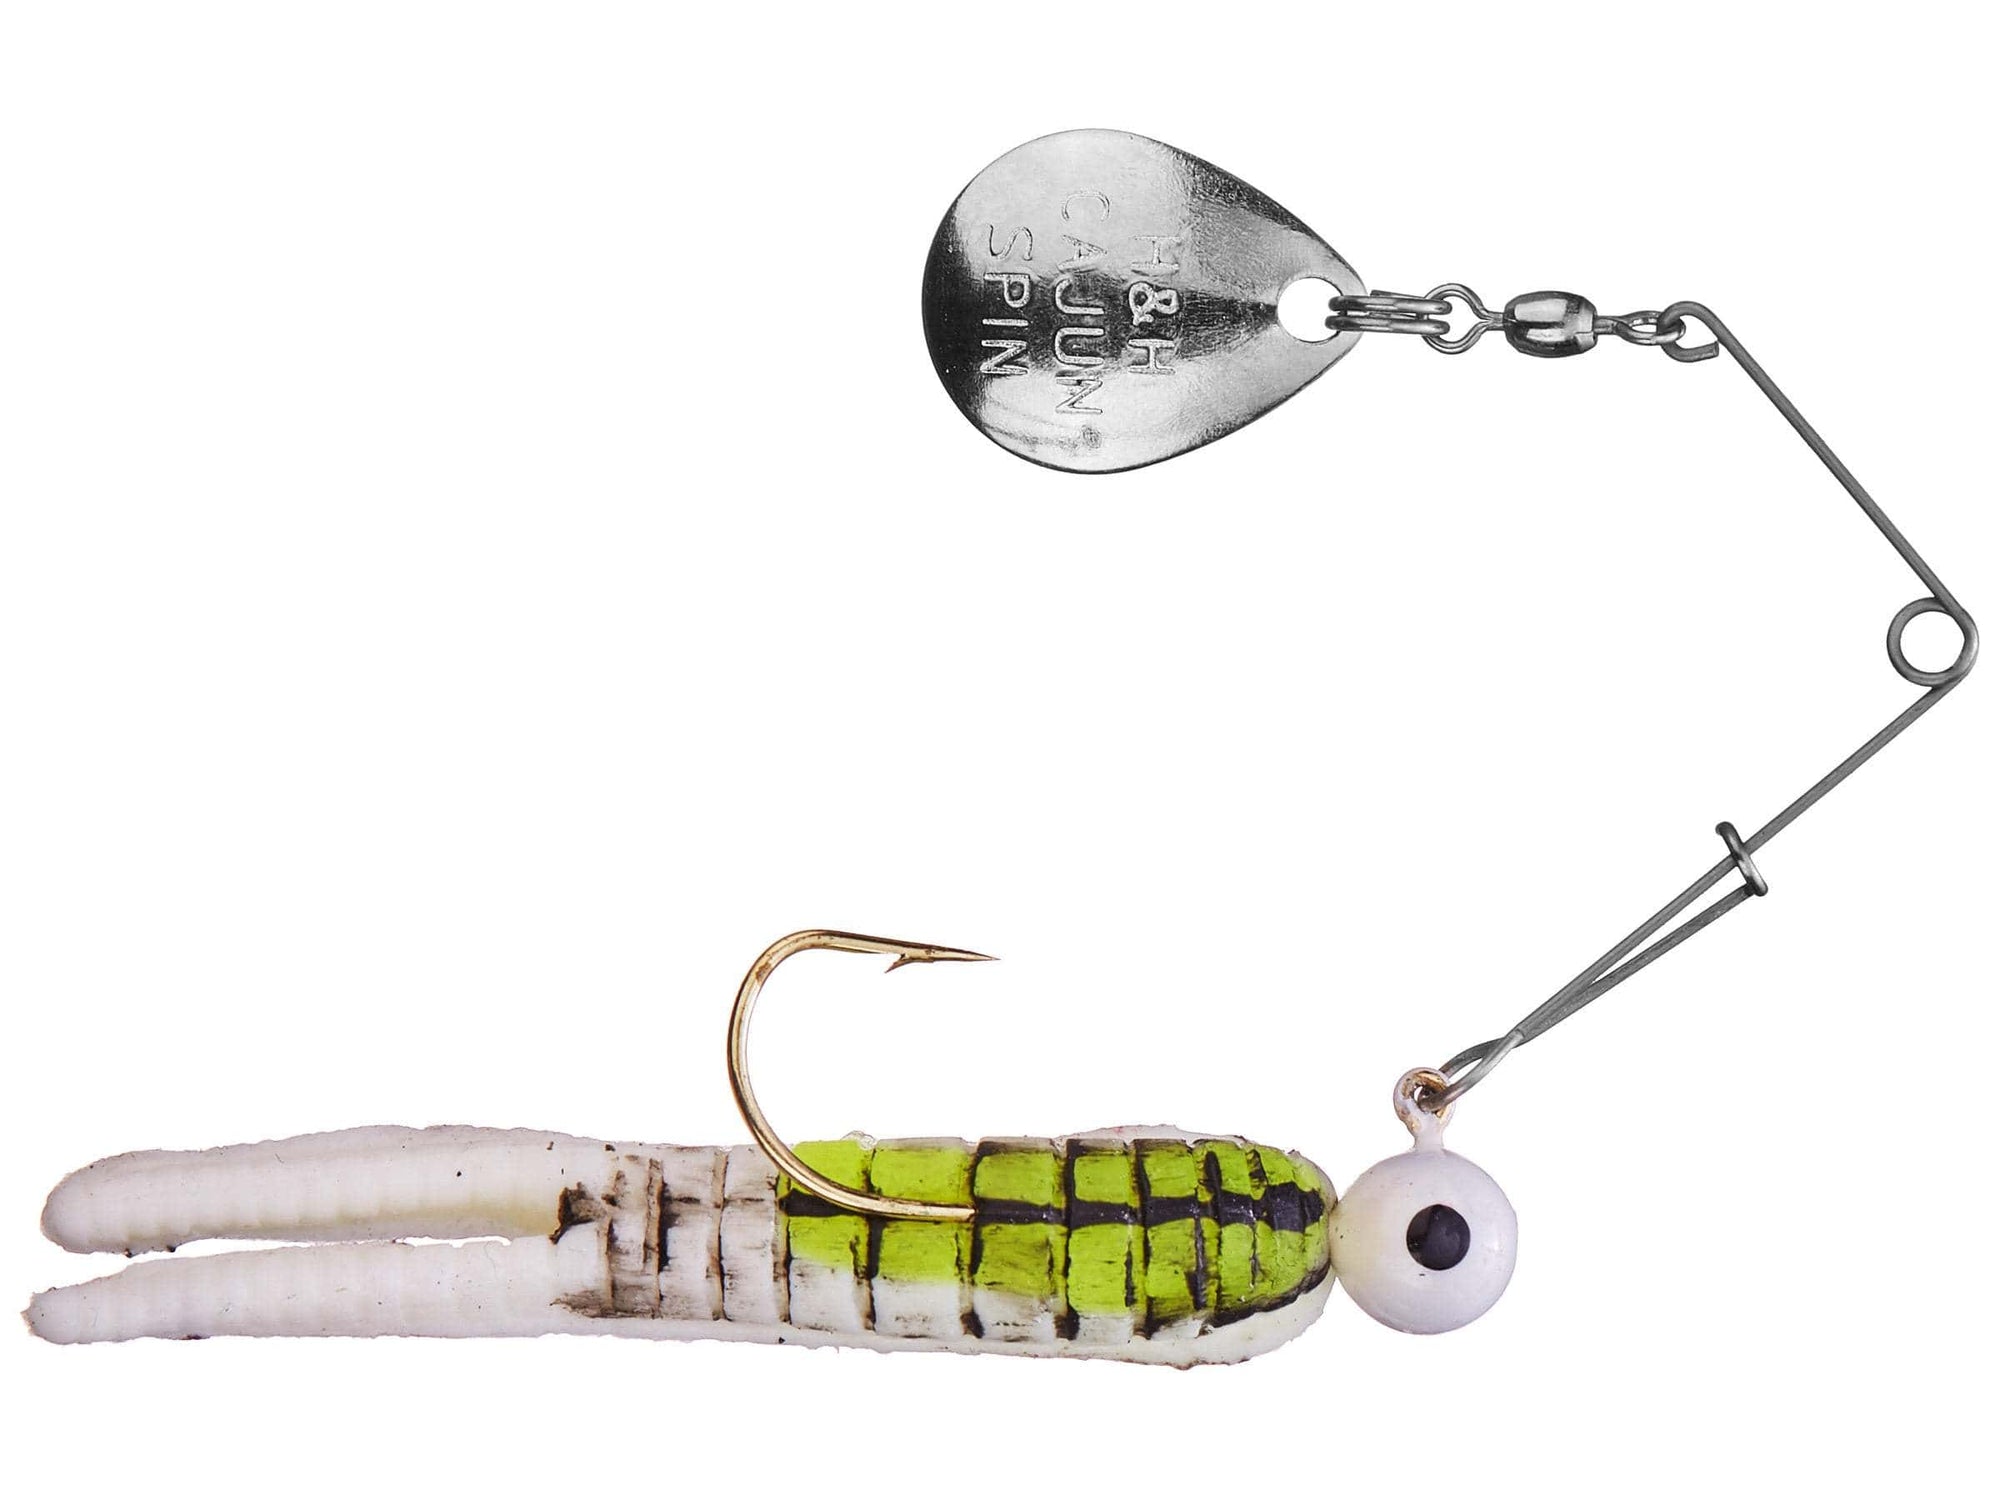 Bait, Spinner Fishing Kit, Lures For Pike, Walleye, Glitter Soft Bait  (supplied With Pliers)